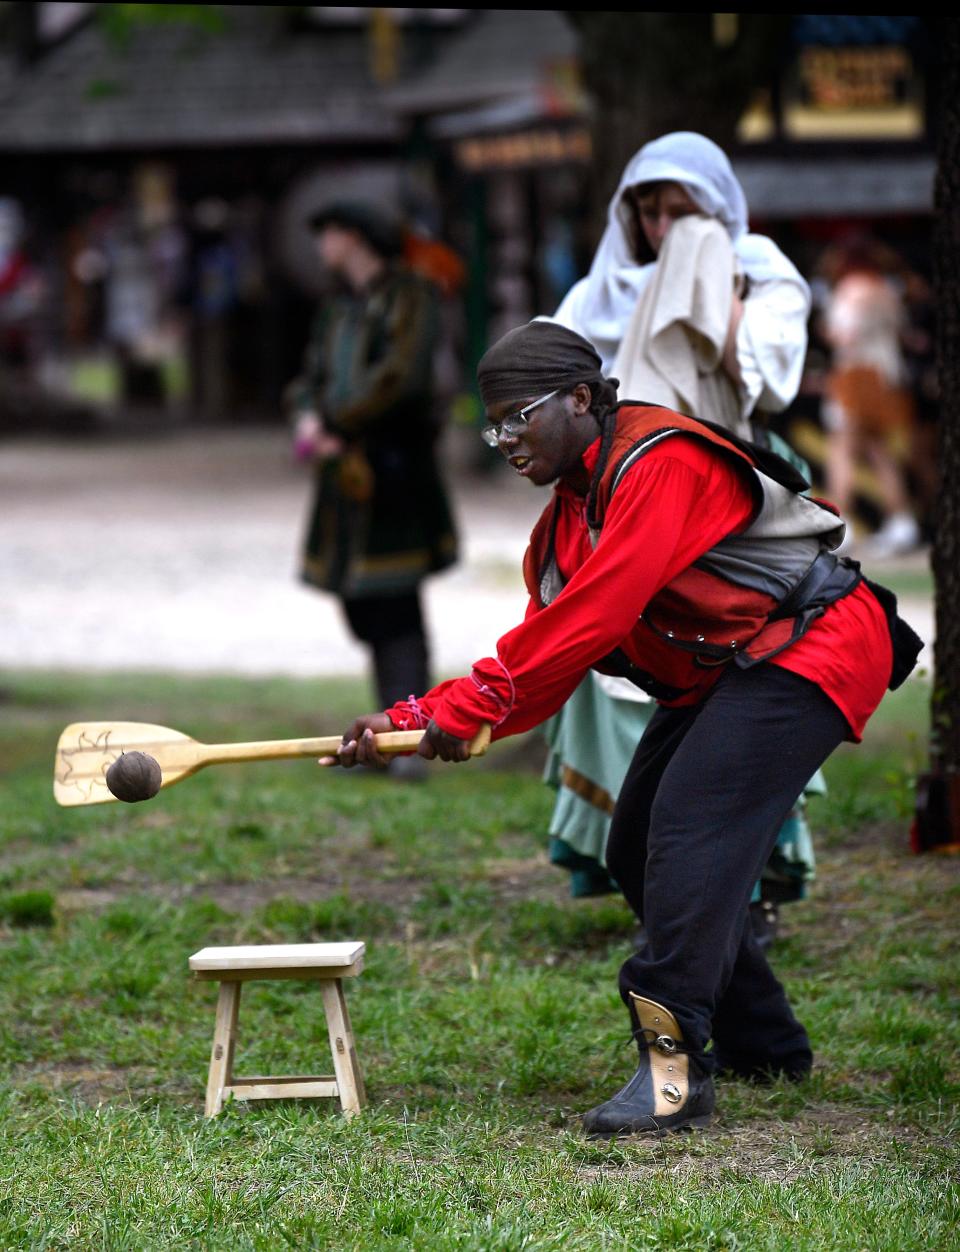 Bakari Boardman connects using a canoe paddle during a game of Stool Ball at Scarborough Renaissance Festival.